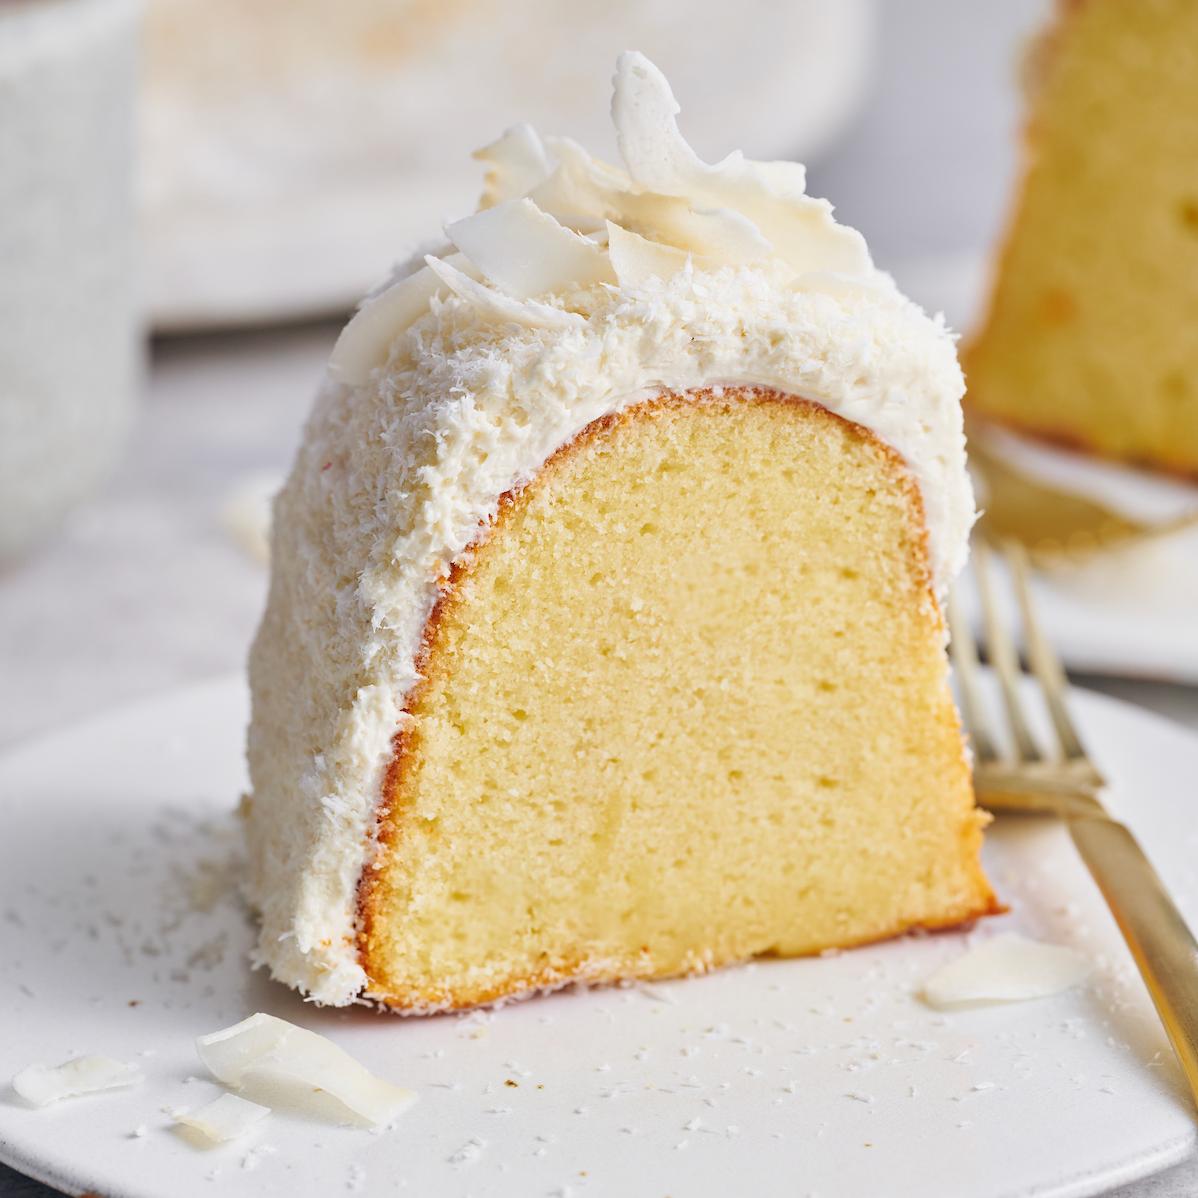  Add a touch of decadence to any occasion with this white chocolate pound cake.